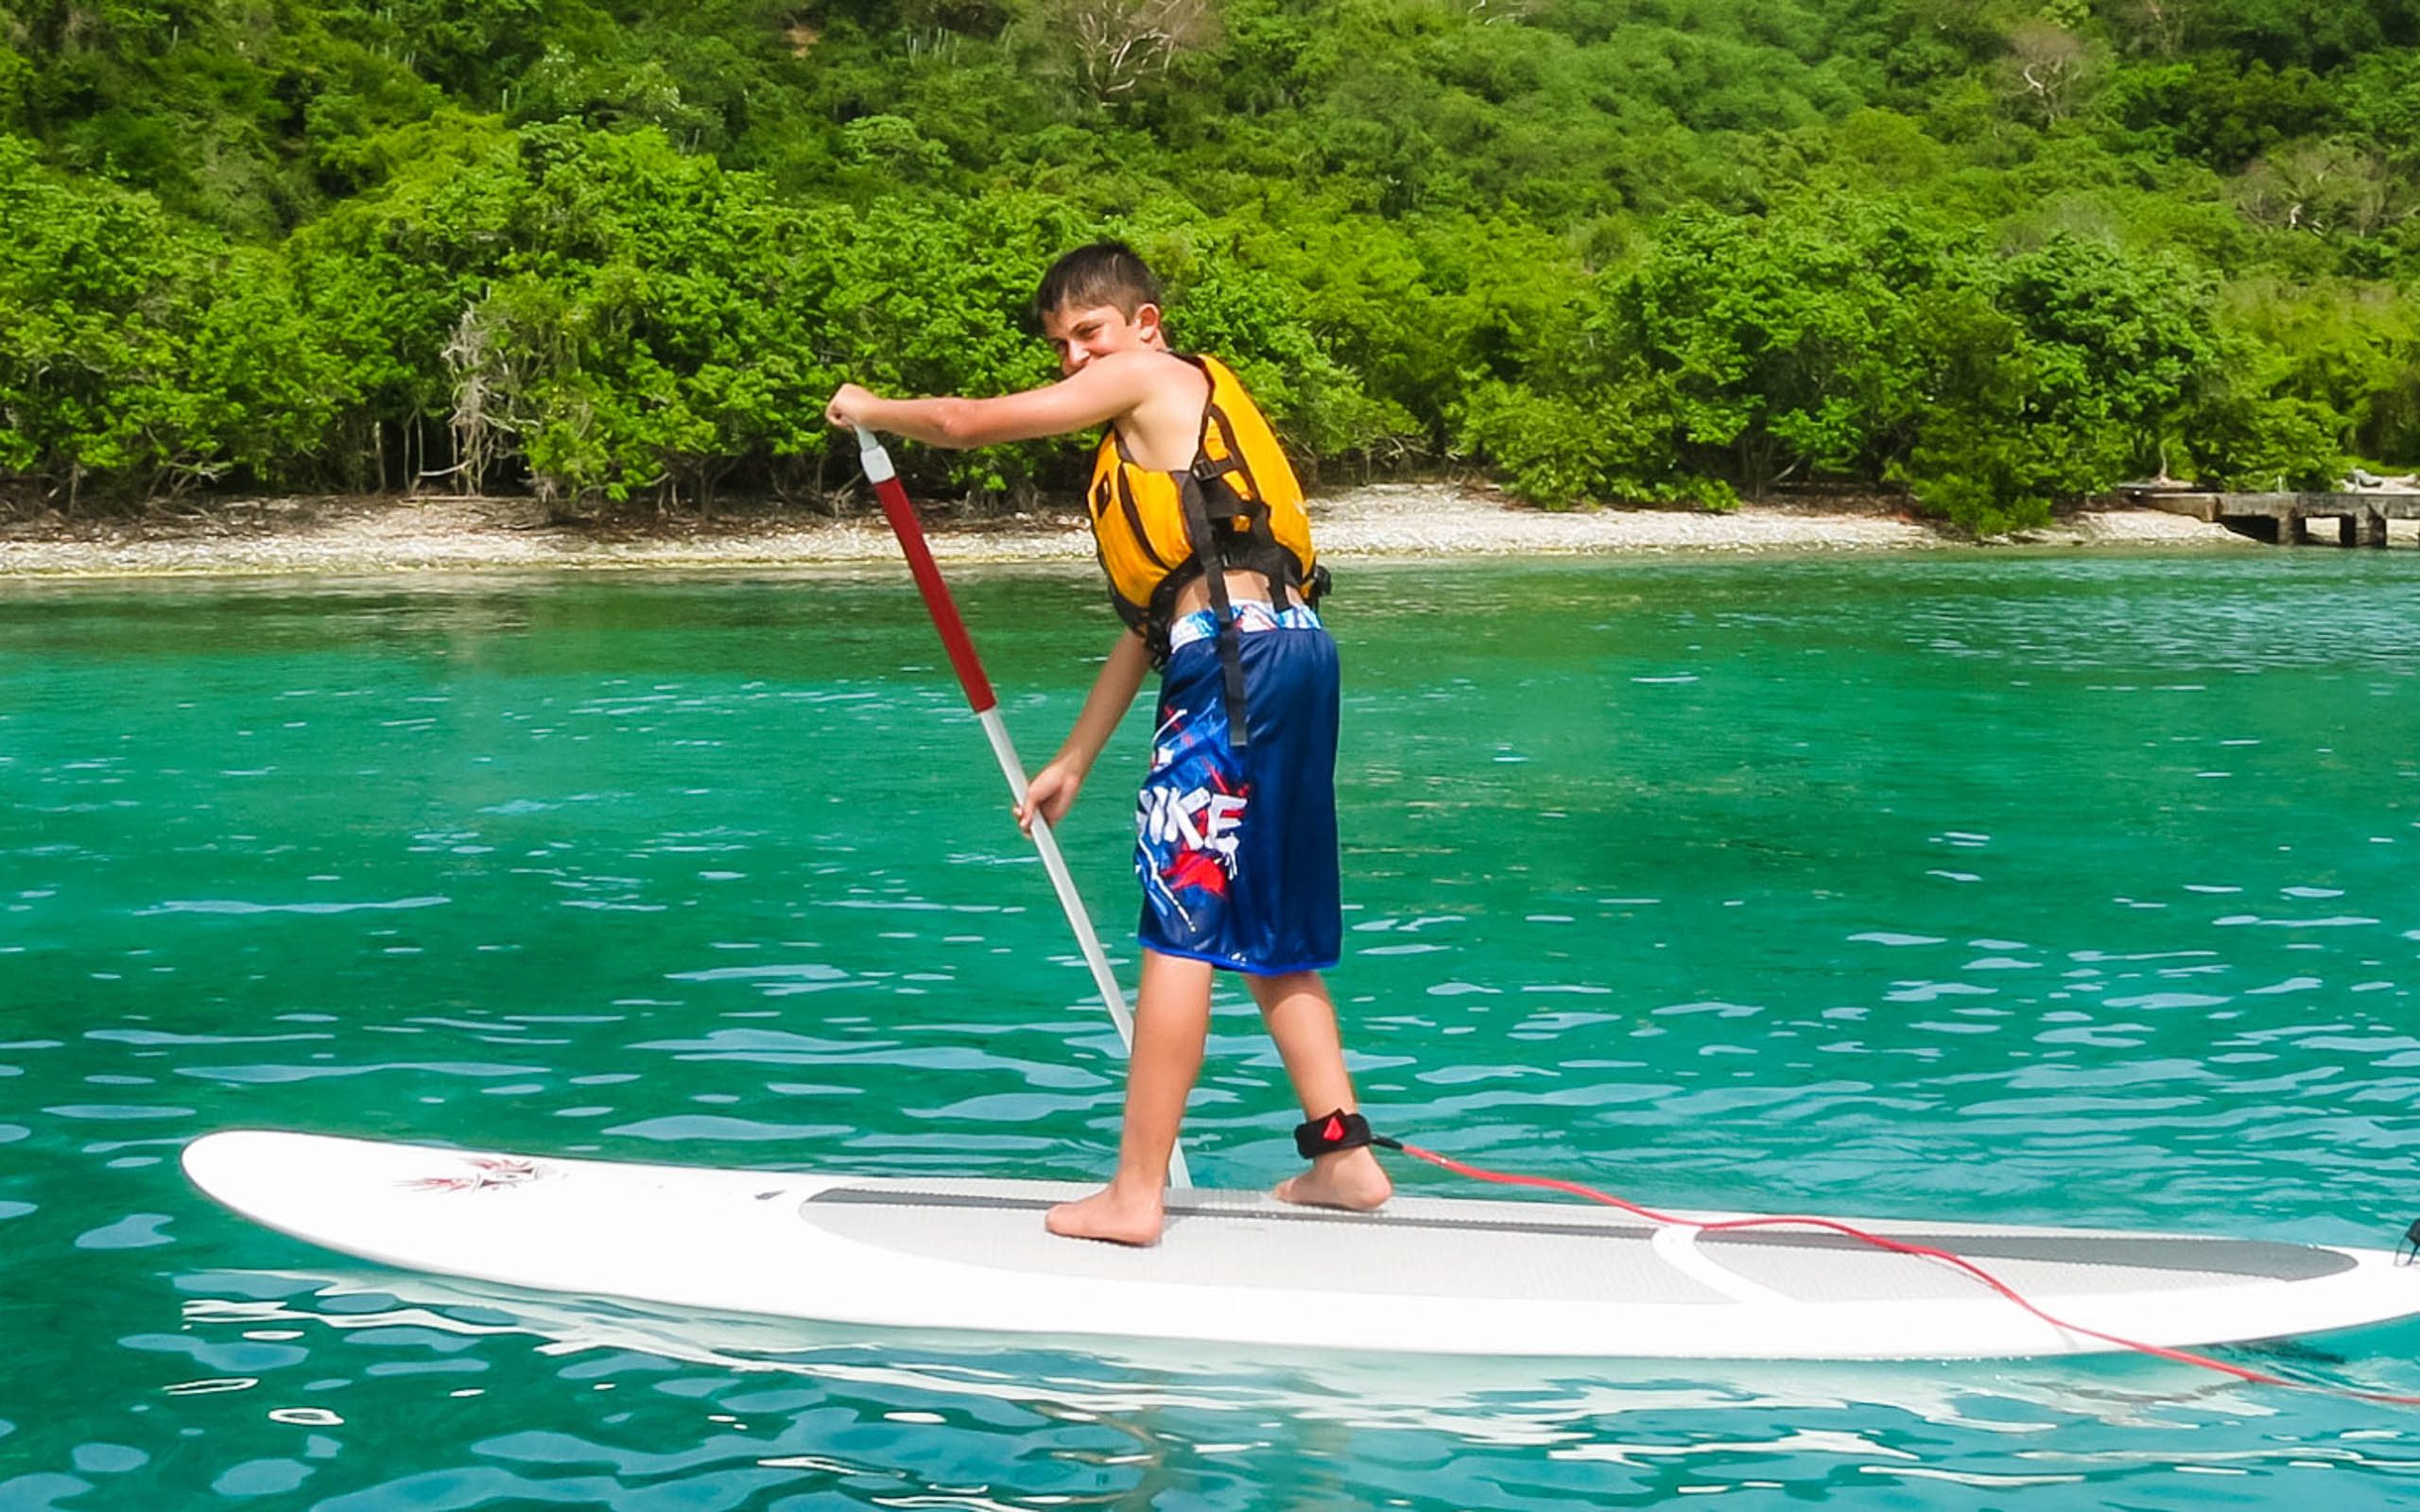 A young man standing on a paddle board in the water.